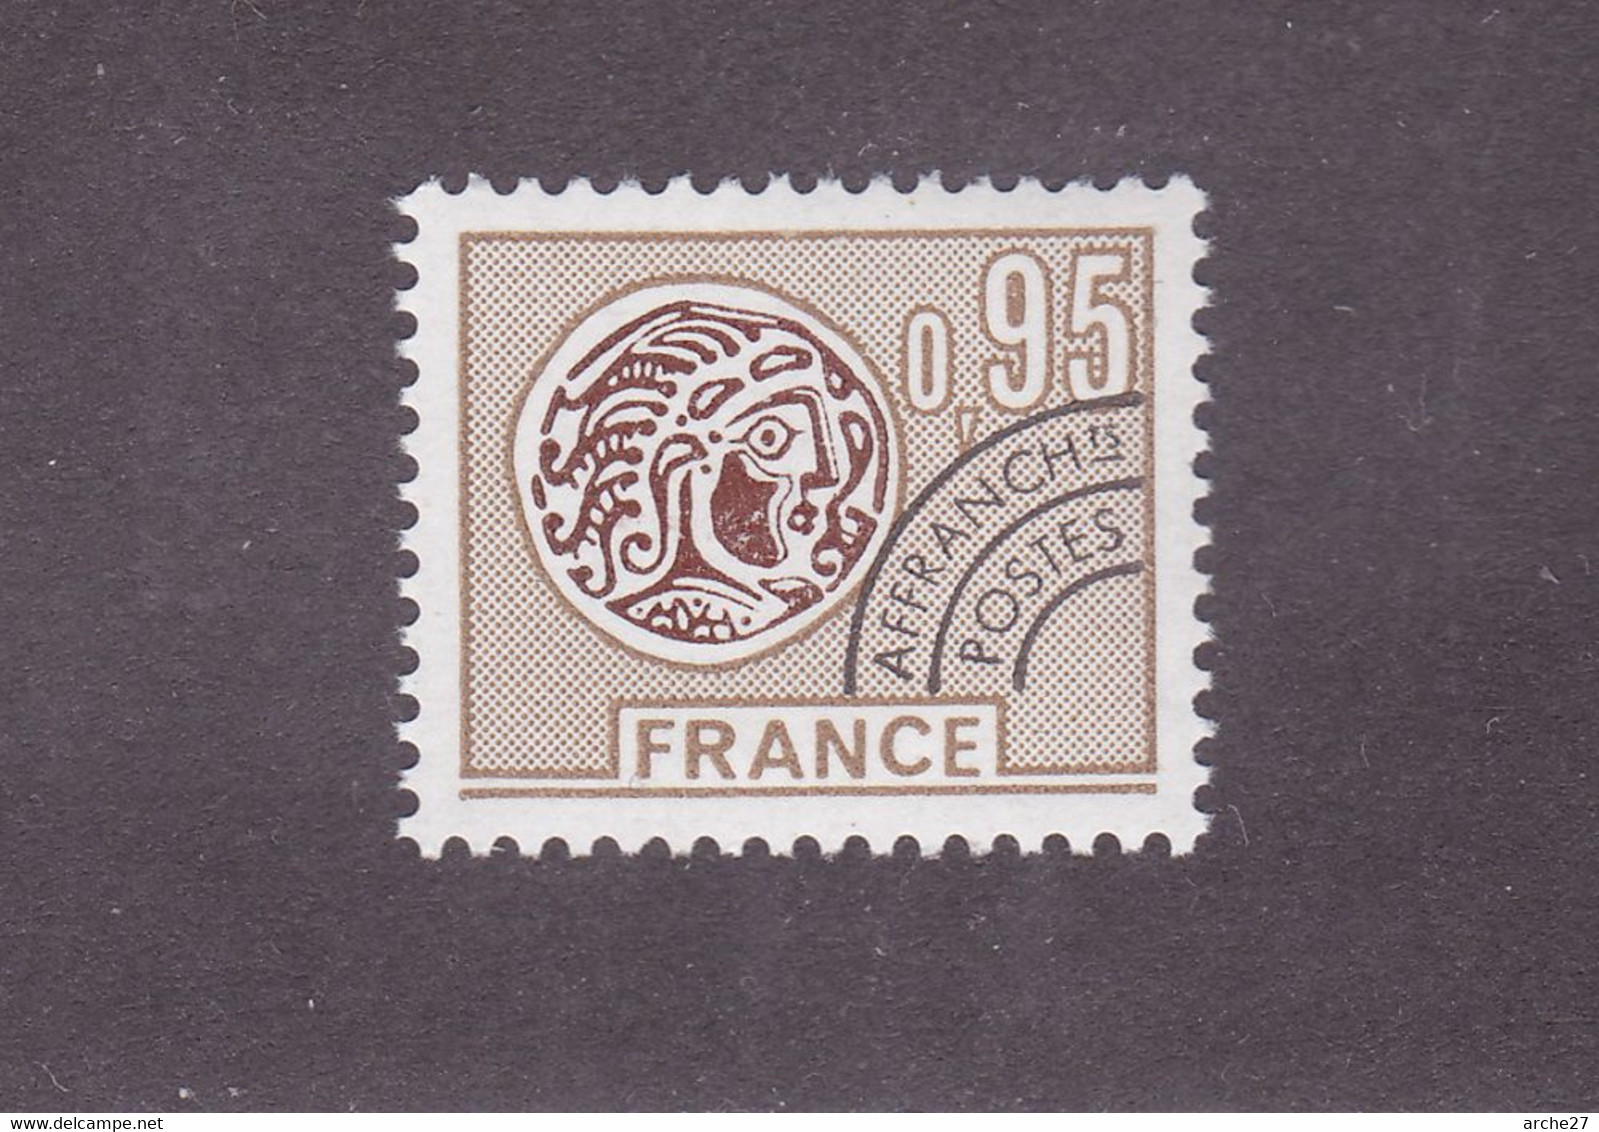 TIMBRE FRANCE PREOBLITERE N° 143 NEUF ** - 1964-1988